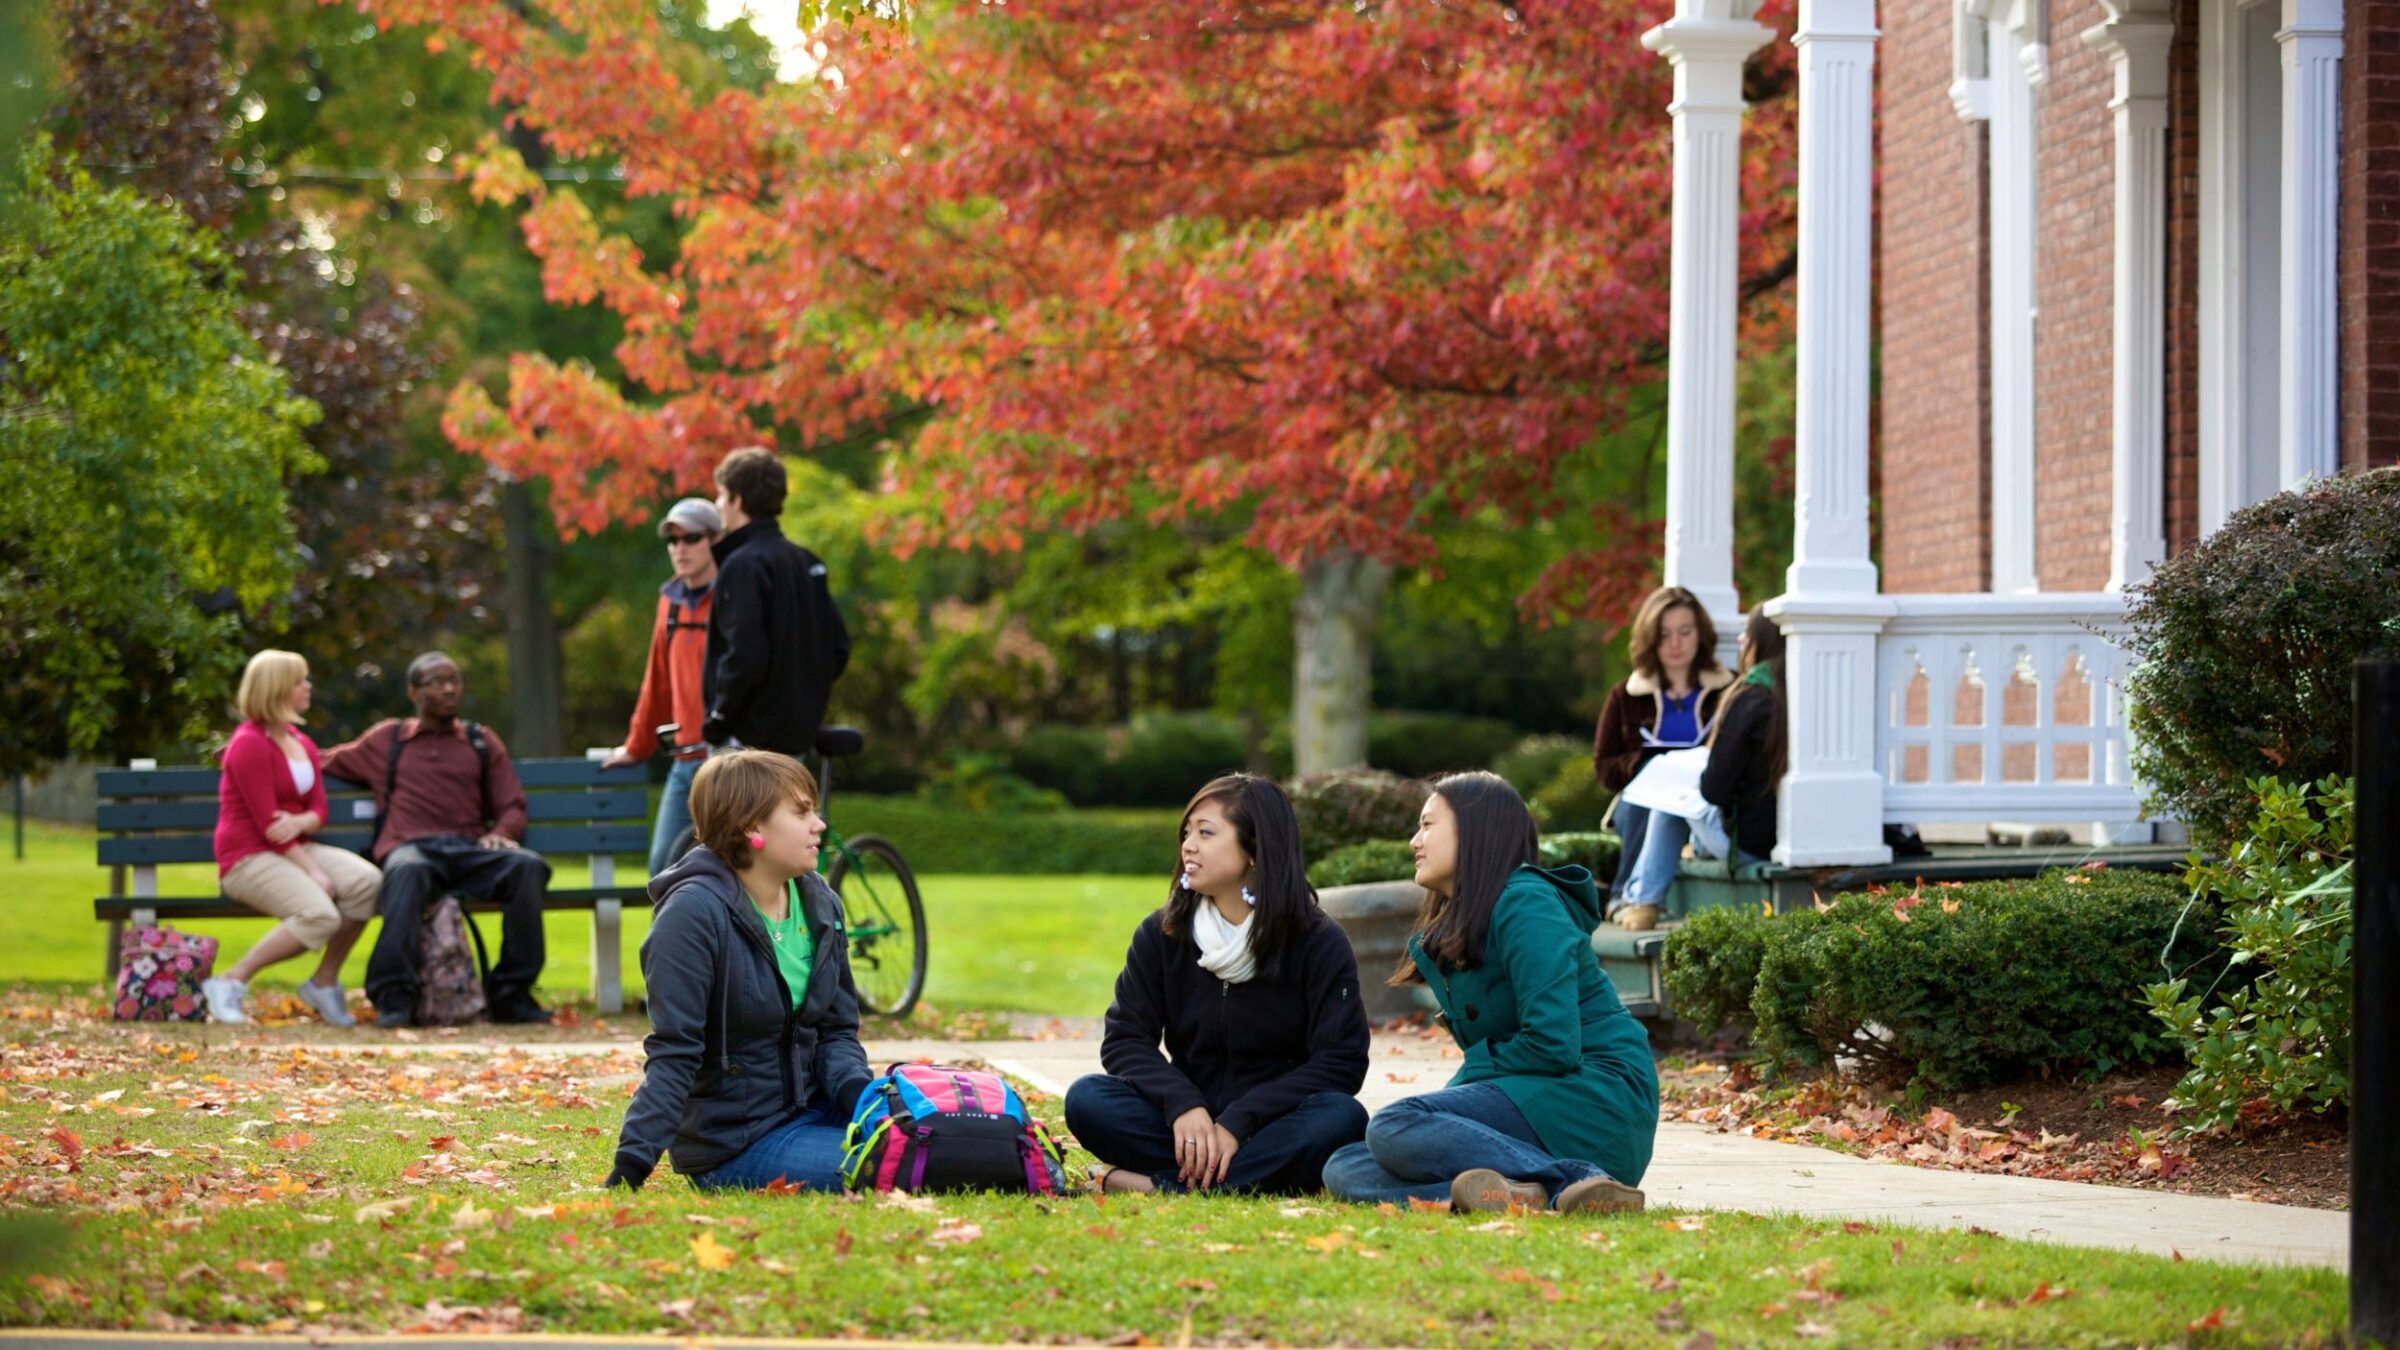 Students sitting outside a dorm hall in the grass during the fall season